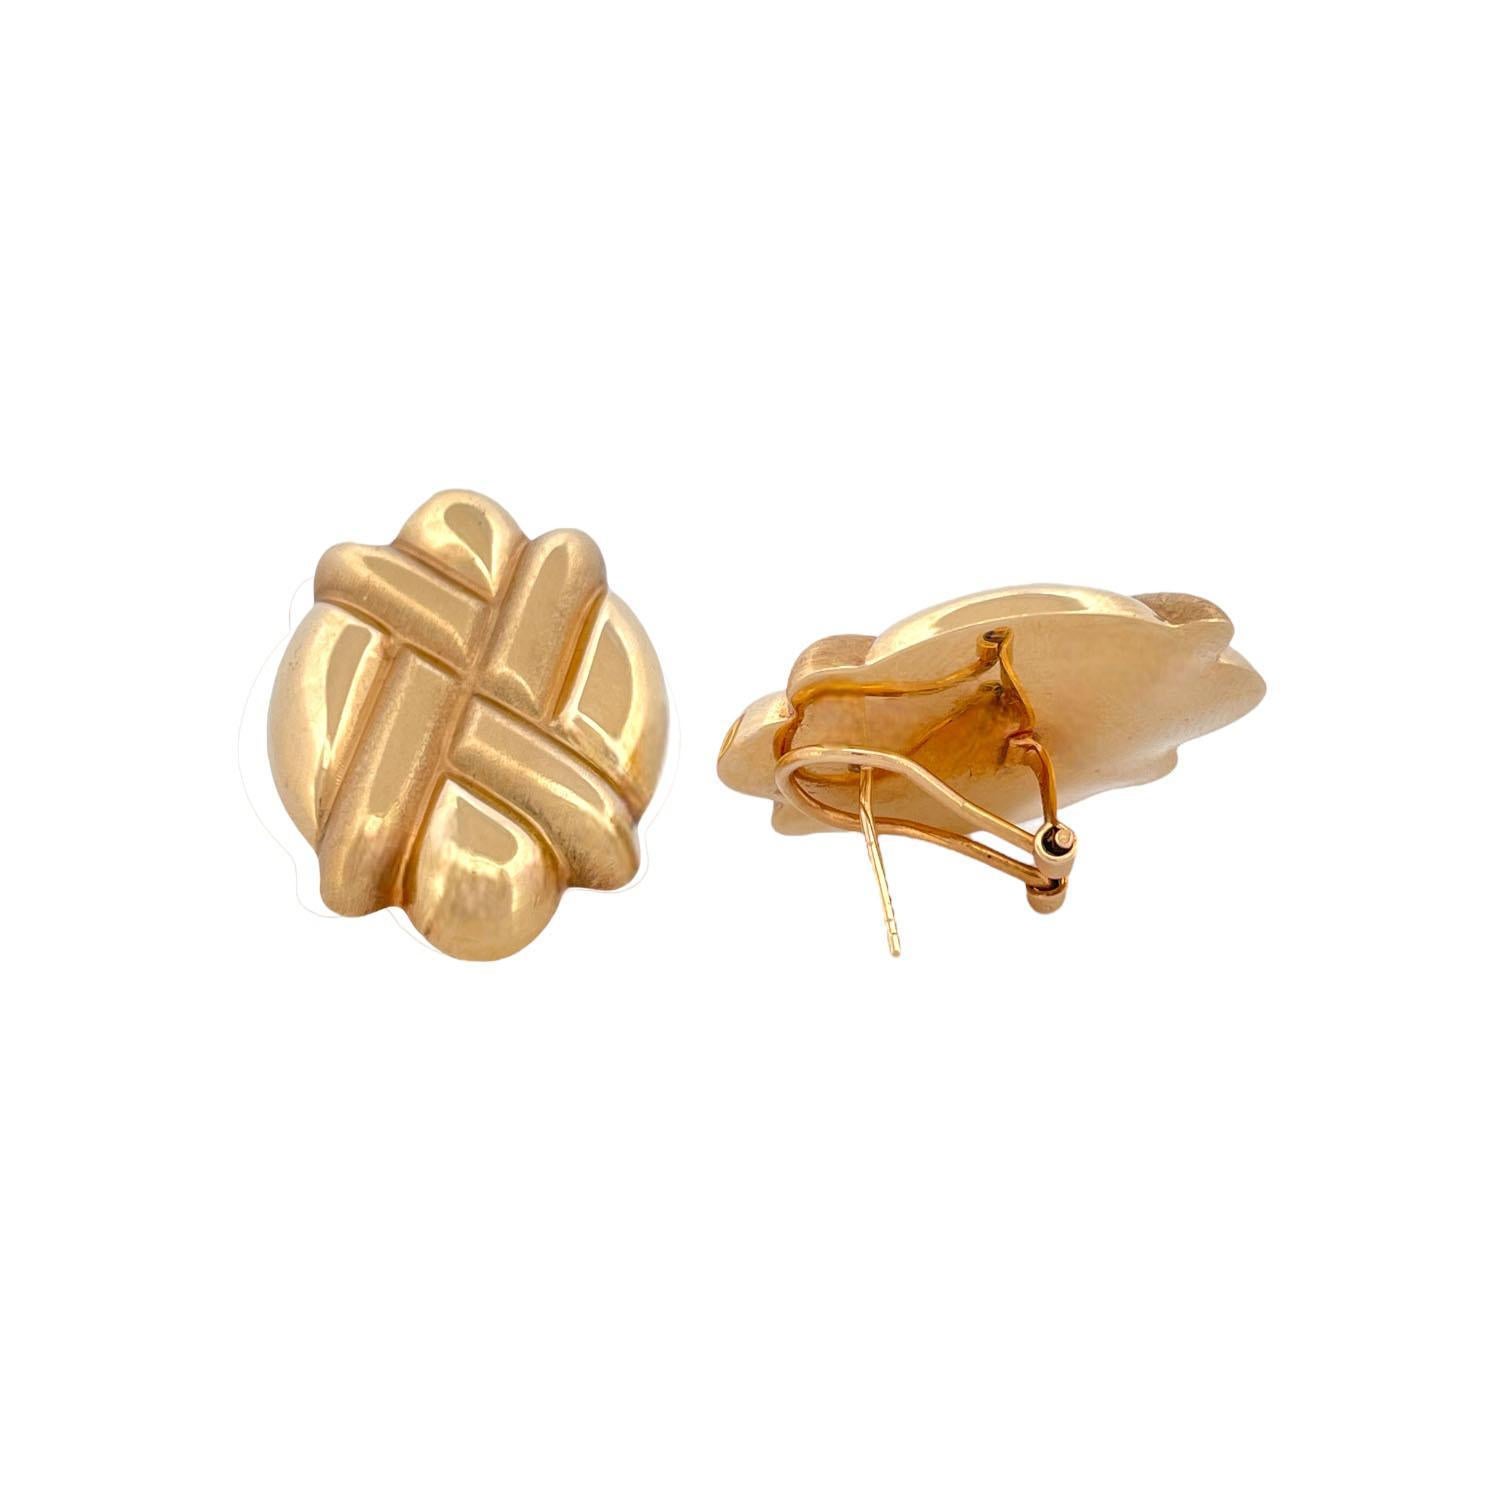 This charming Pineapple Bun Earrings is crafted from 14K yellow gold and weighing 7.68 grams. These earrings exude elegance and allure with their sleek design and radiant gold finish. Perfect for adding a touch of sophistication to any outfit, they